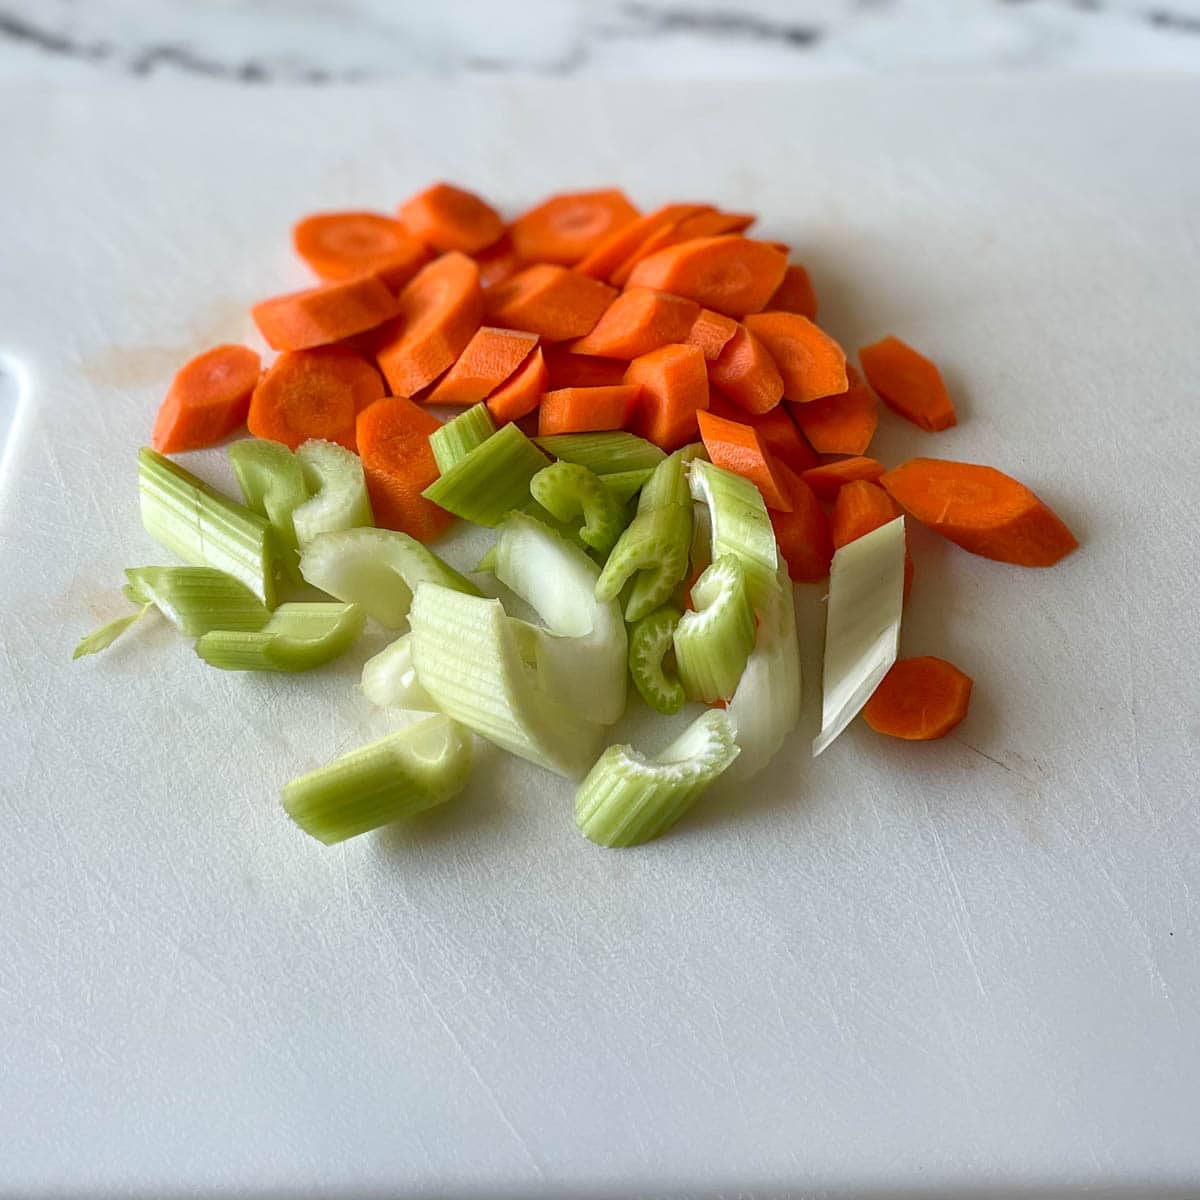 Sliced carrots and celery sit on a white cutting board.